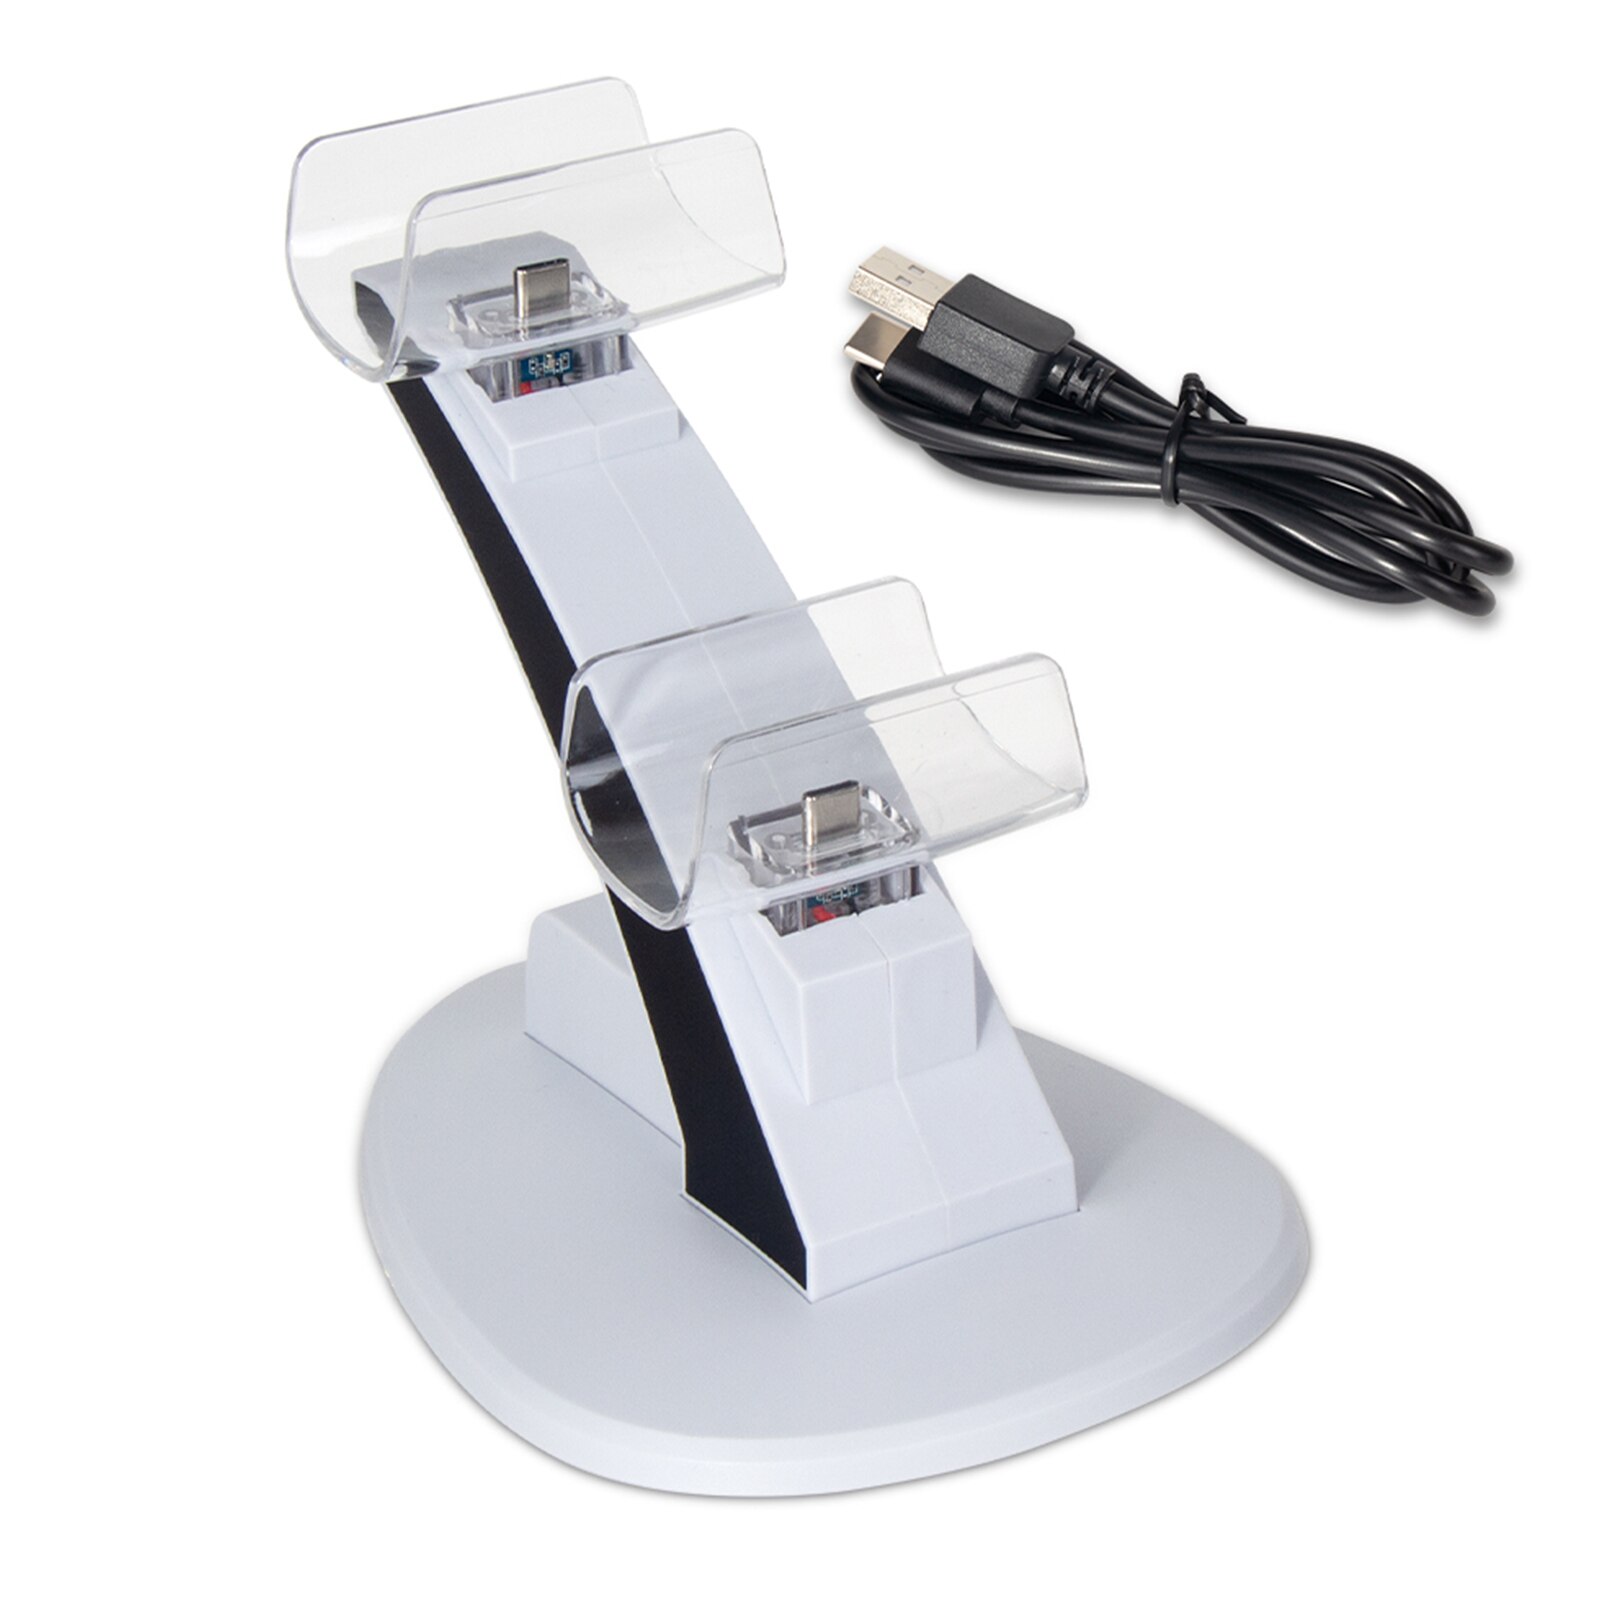 PS5 Controller Oplader Dubbele Usb Snel Opladen Docking Station Stand & Led Indicator Voor Ps 5 Controllers: White